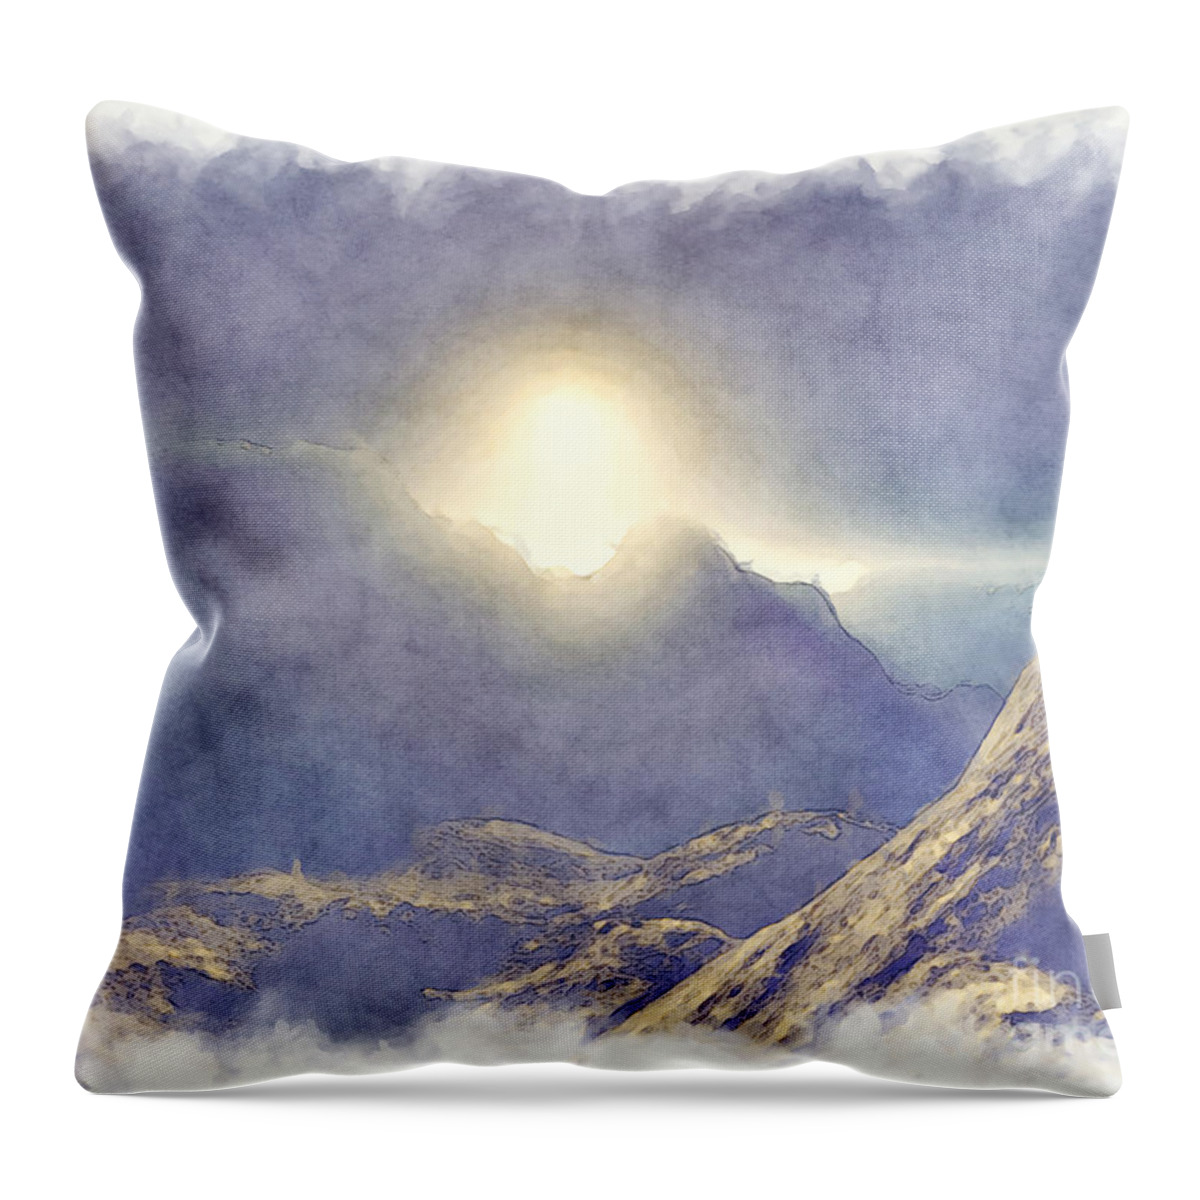 Mountains Throw Pillow featuring the digital art Top of The World by Phil Perkins